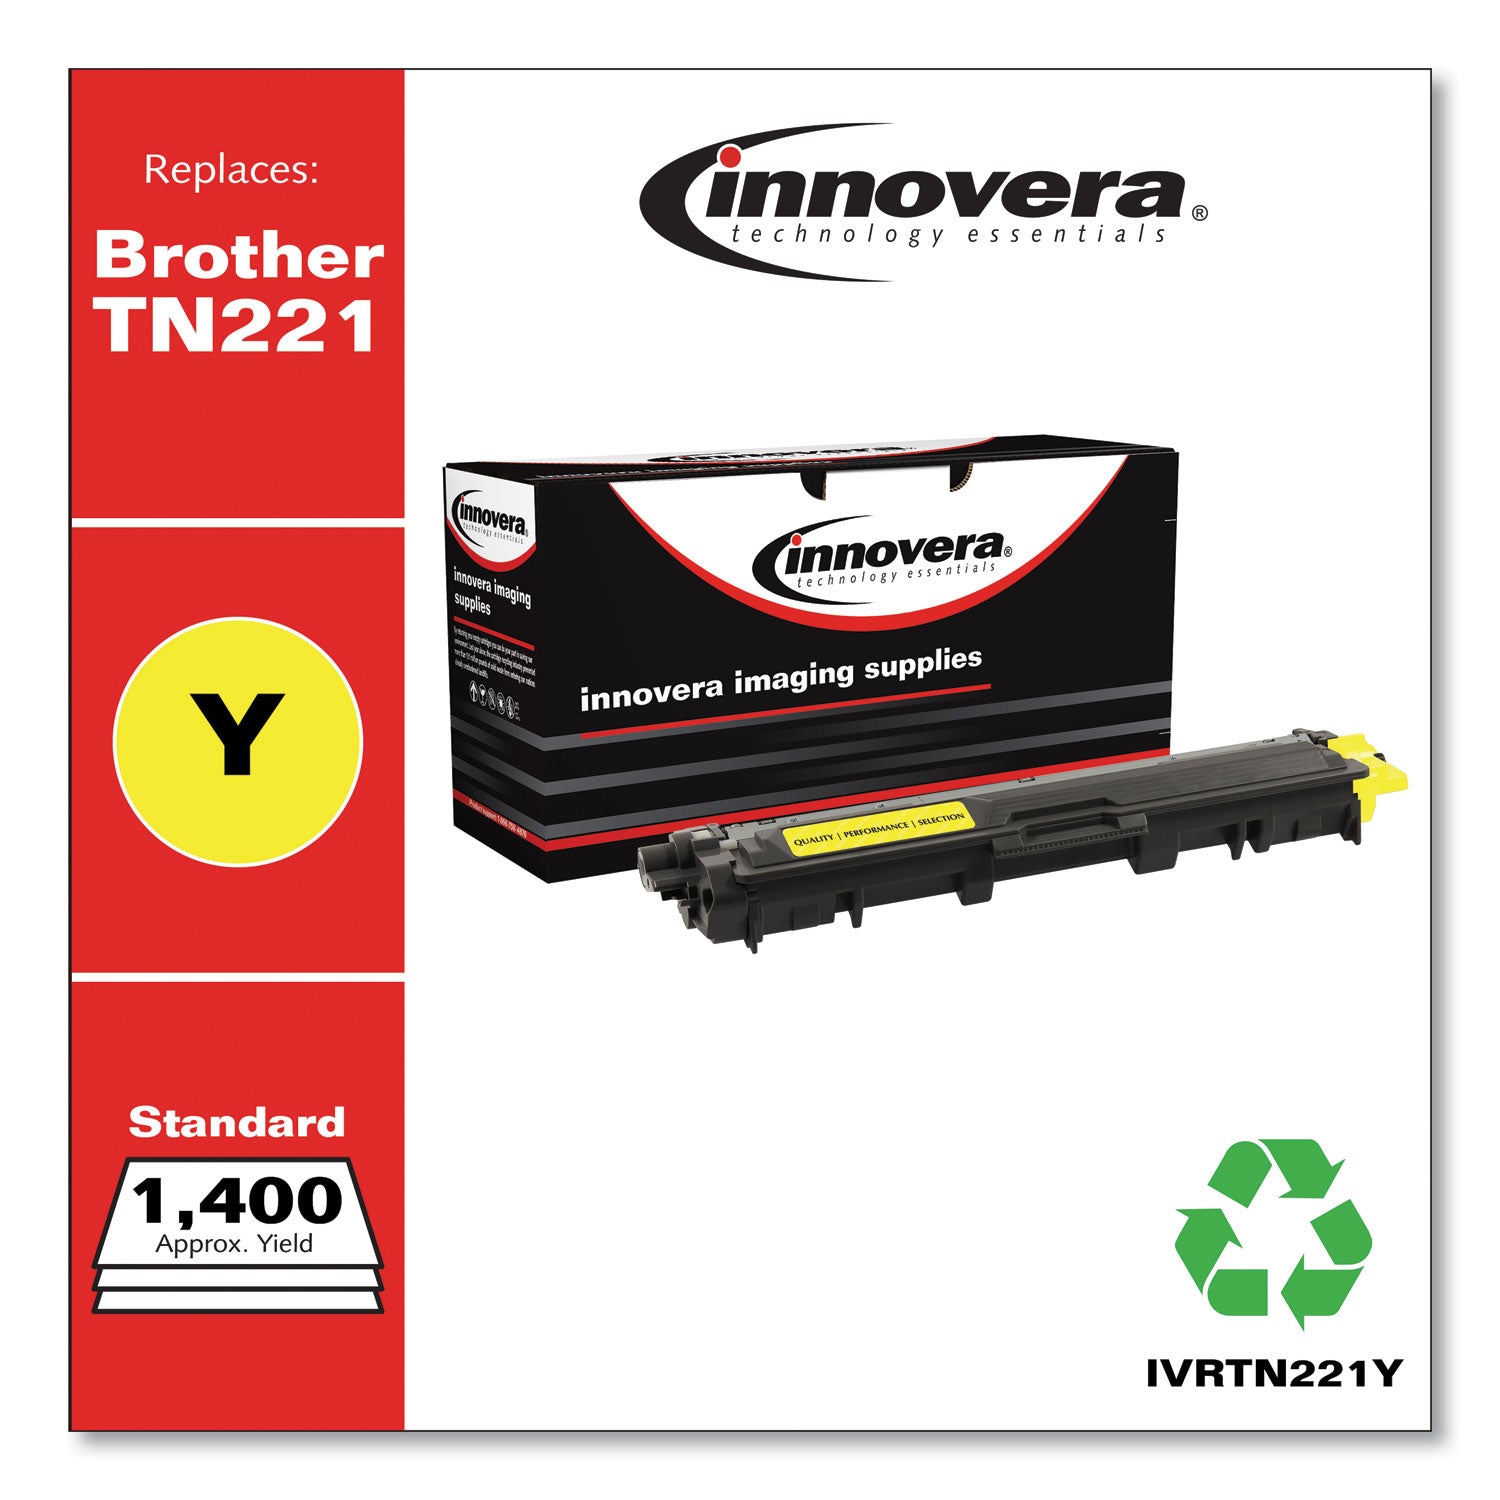 remanufactured-yellow-toner-replacement-for-tn221y-1400-page-yield_ivrtn221y - 2